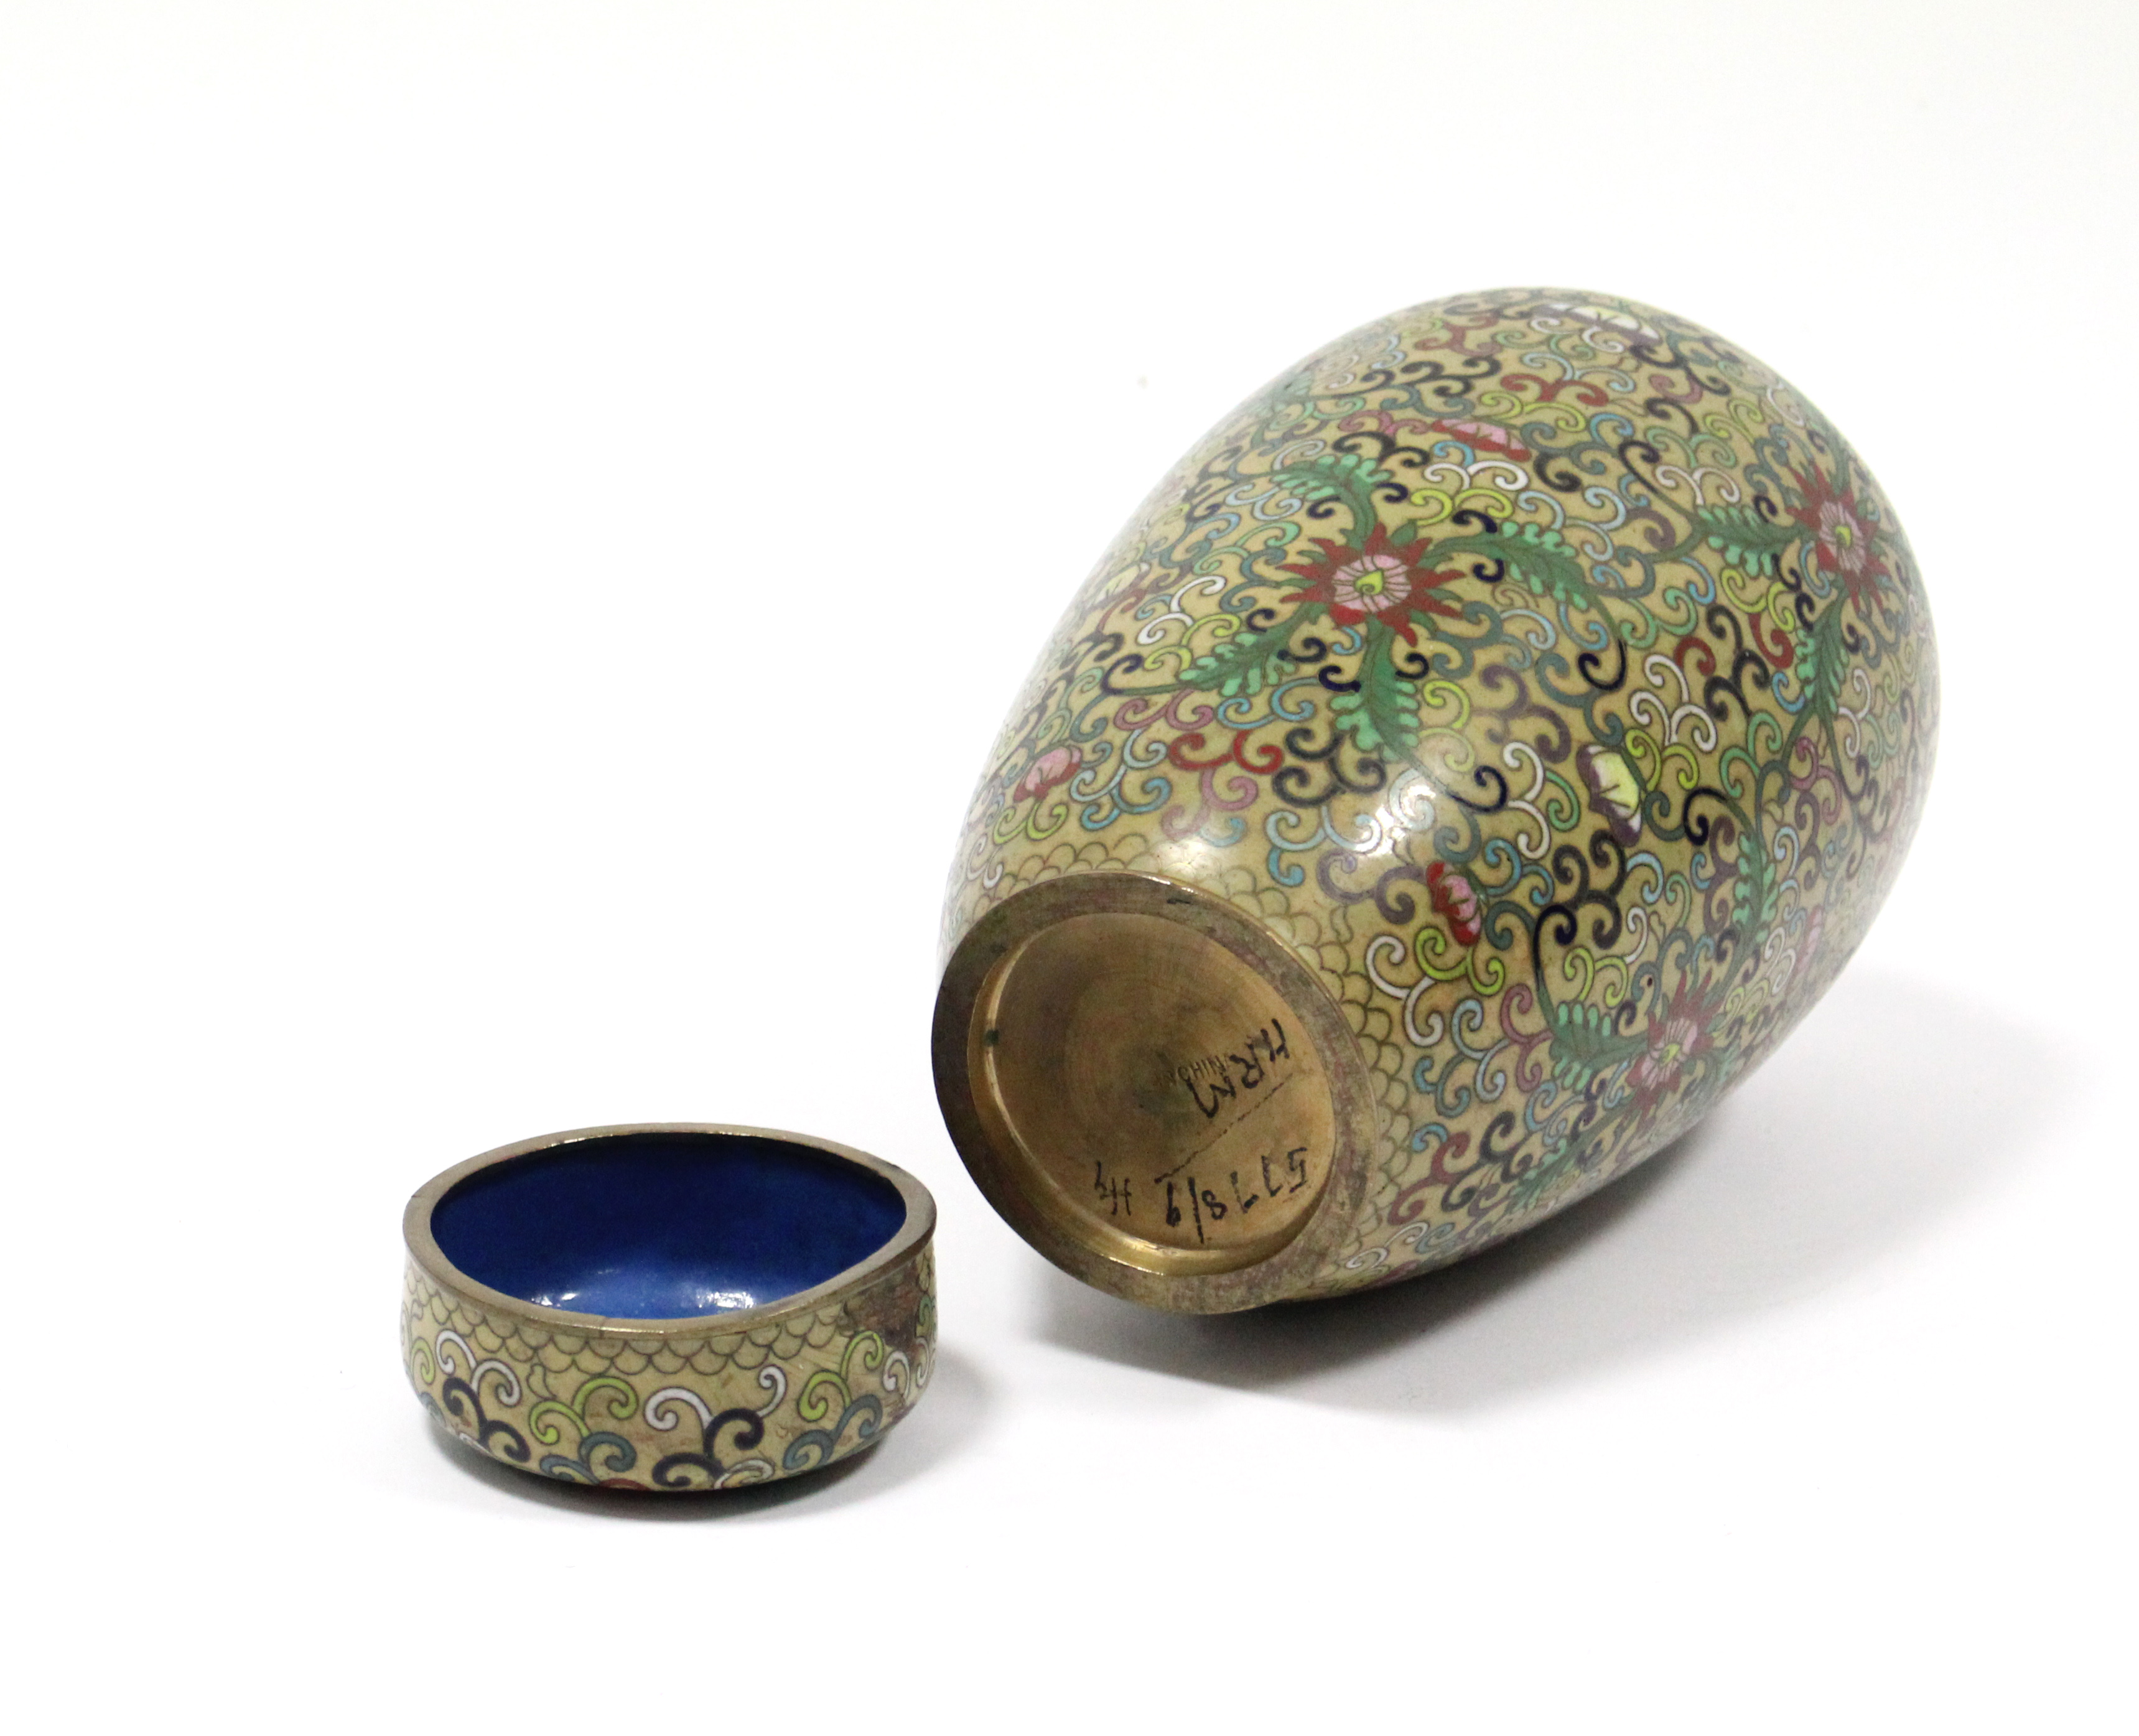 A late 19th/early 20th century Chinese cloisonné ovoid vase with stylised scrolling foliate design - Image 3 of 3